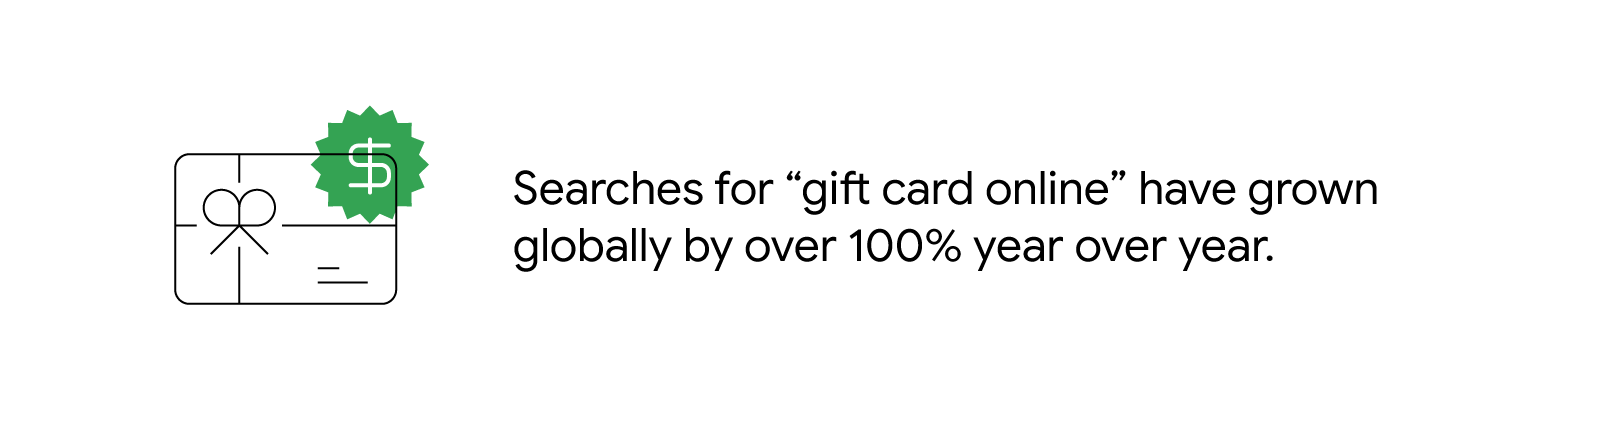 customer rentention with gift cards